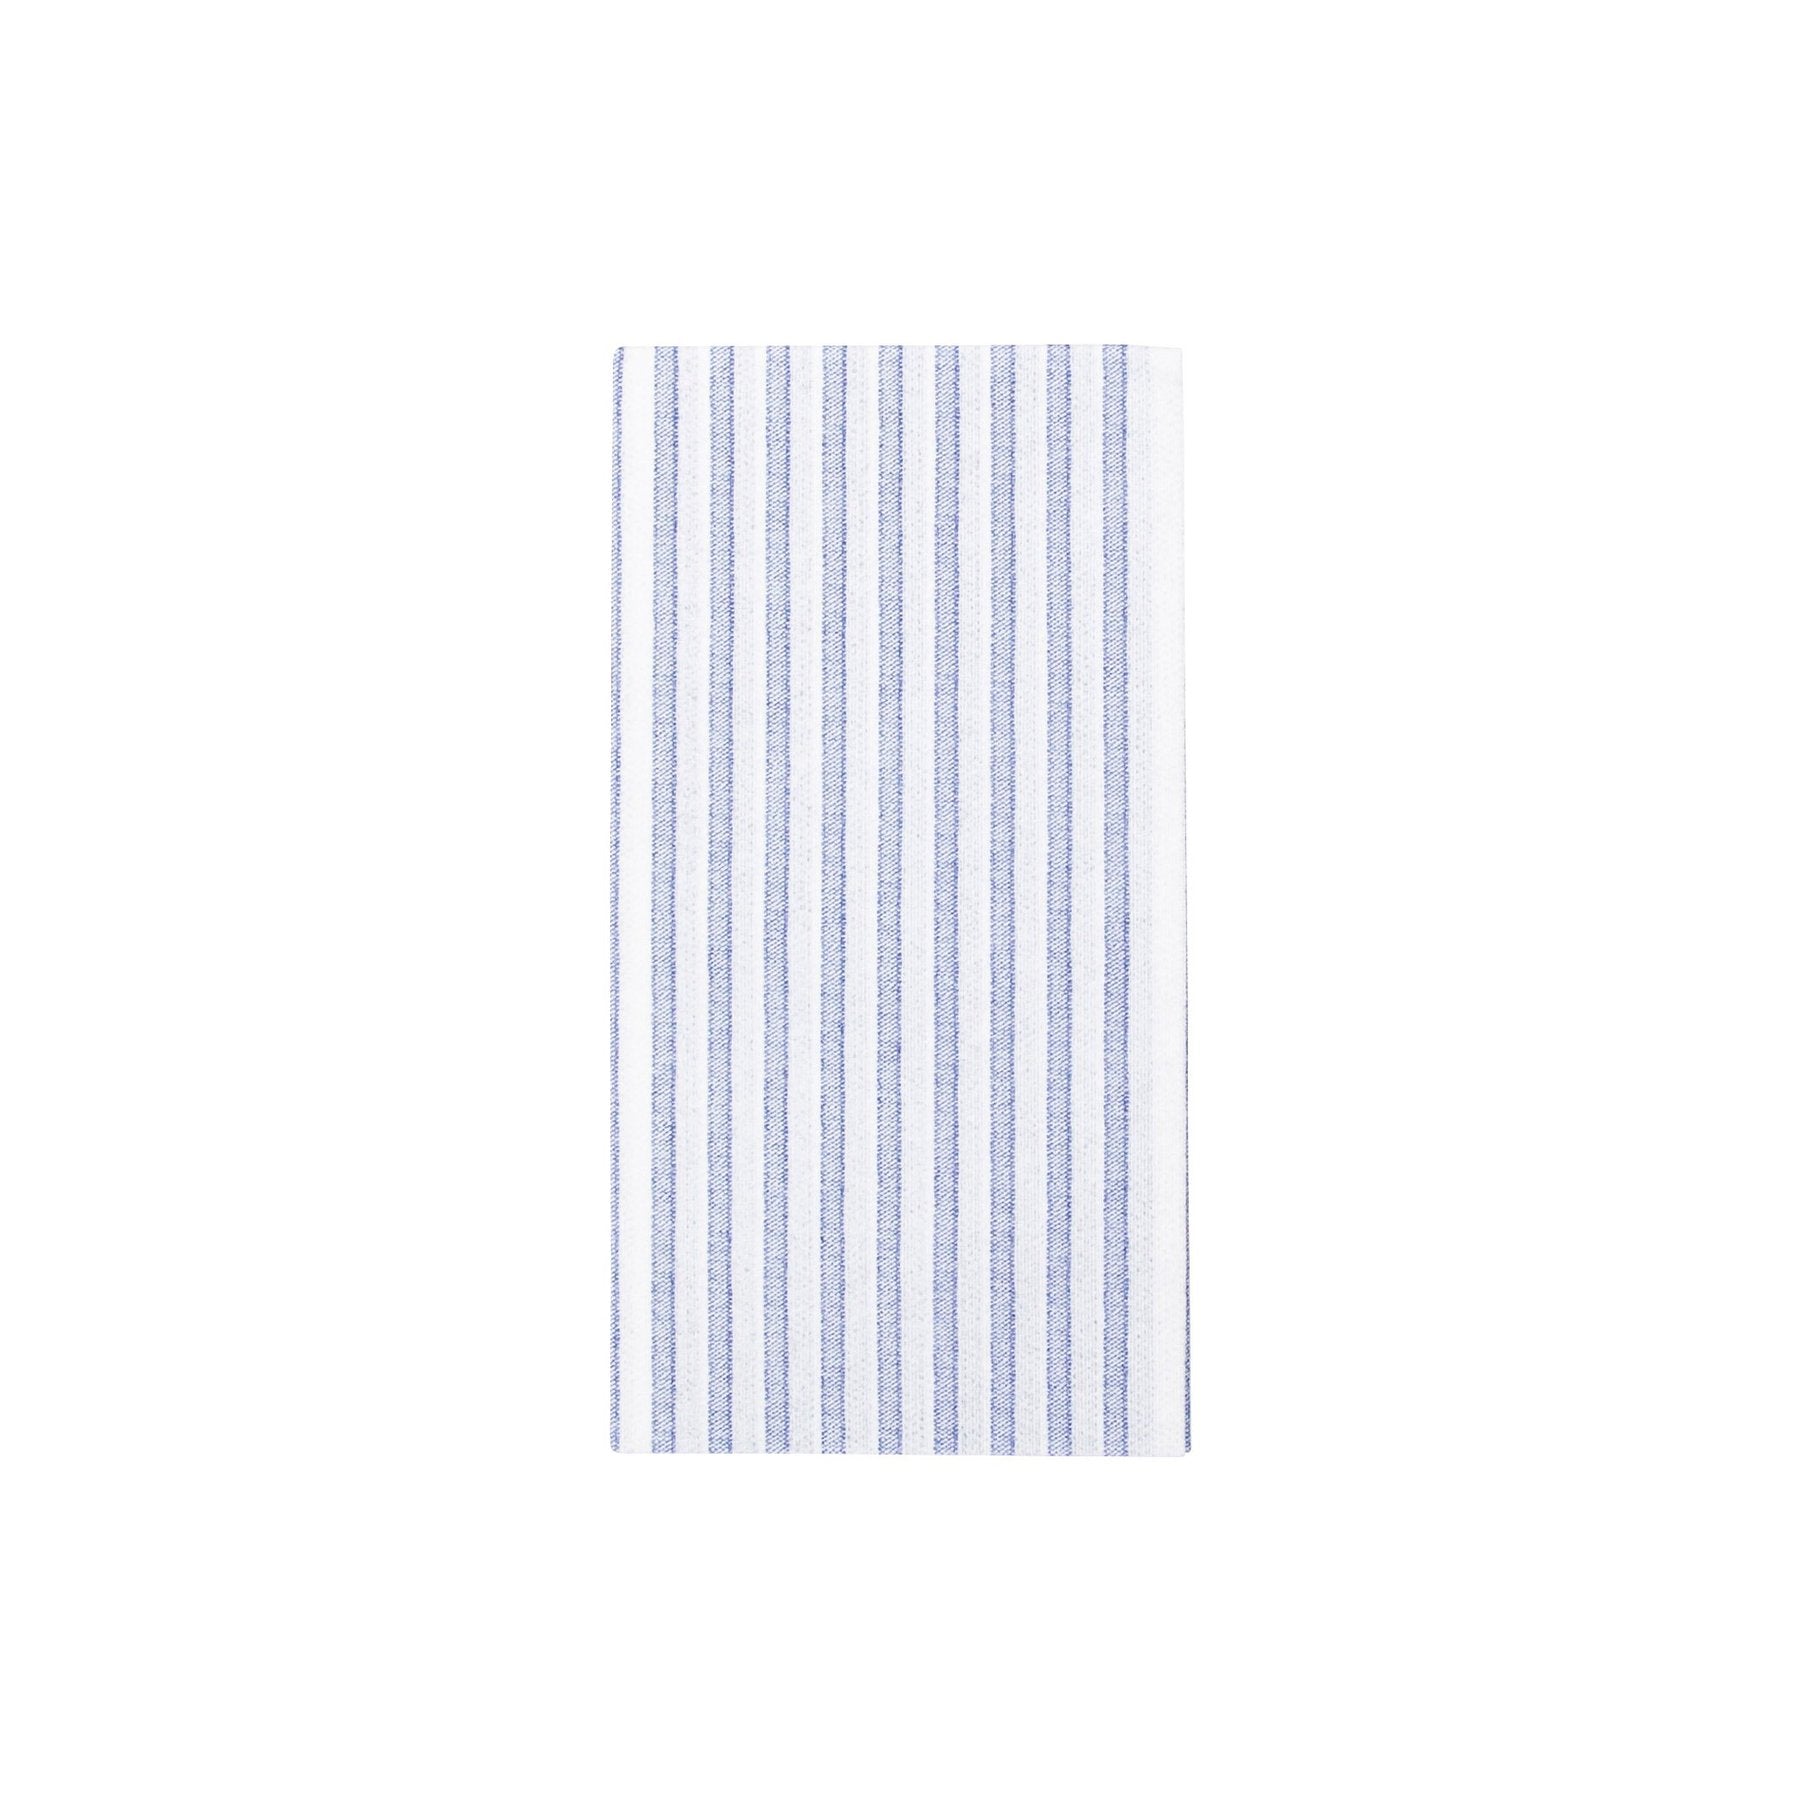 Papersoft Napkins Capri Blue Guest Towels - Pack of 20